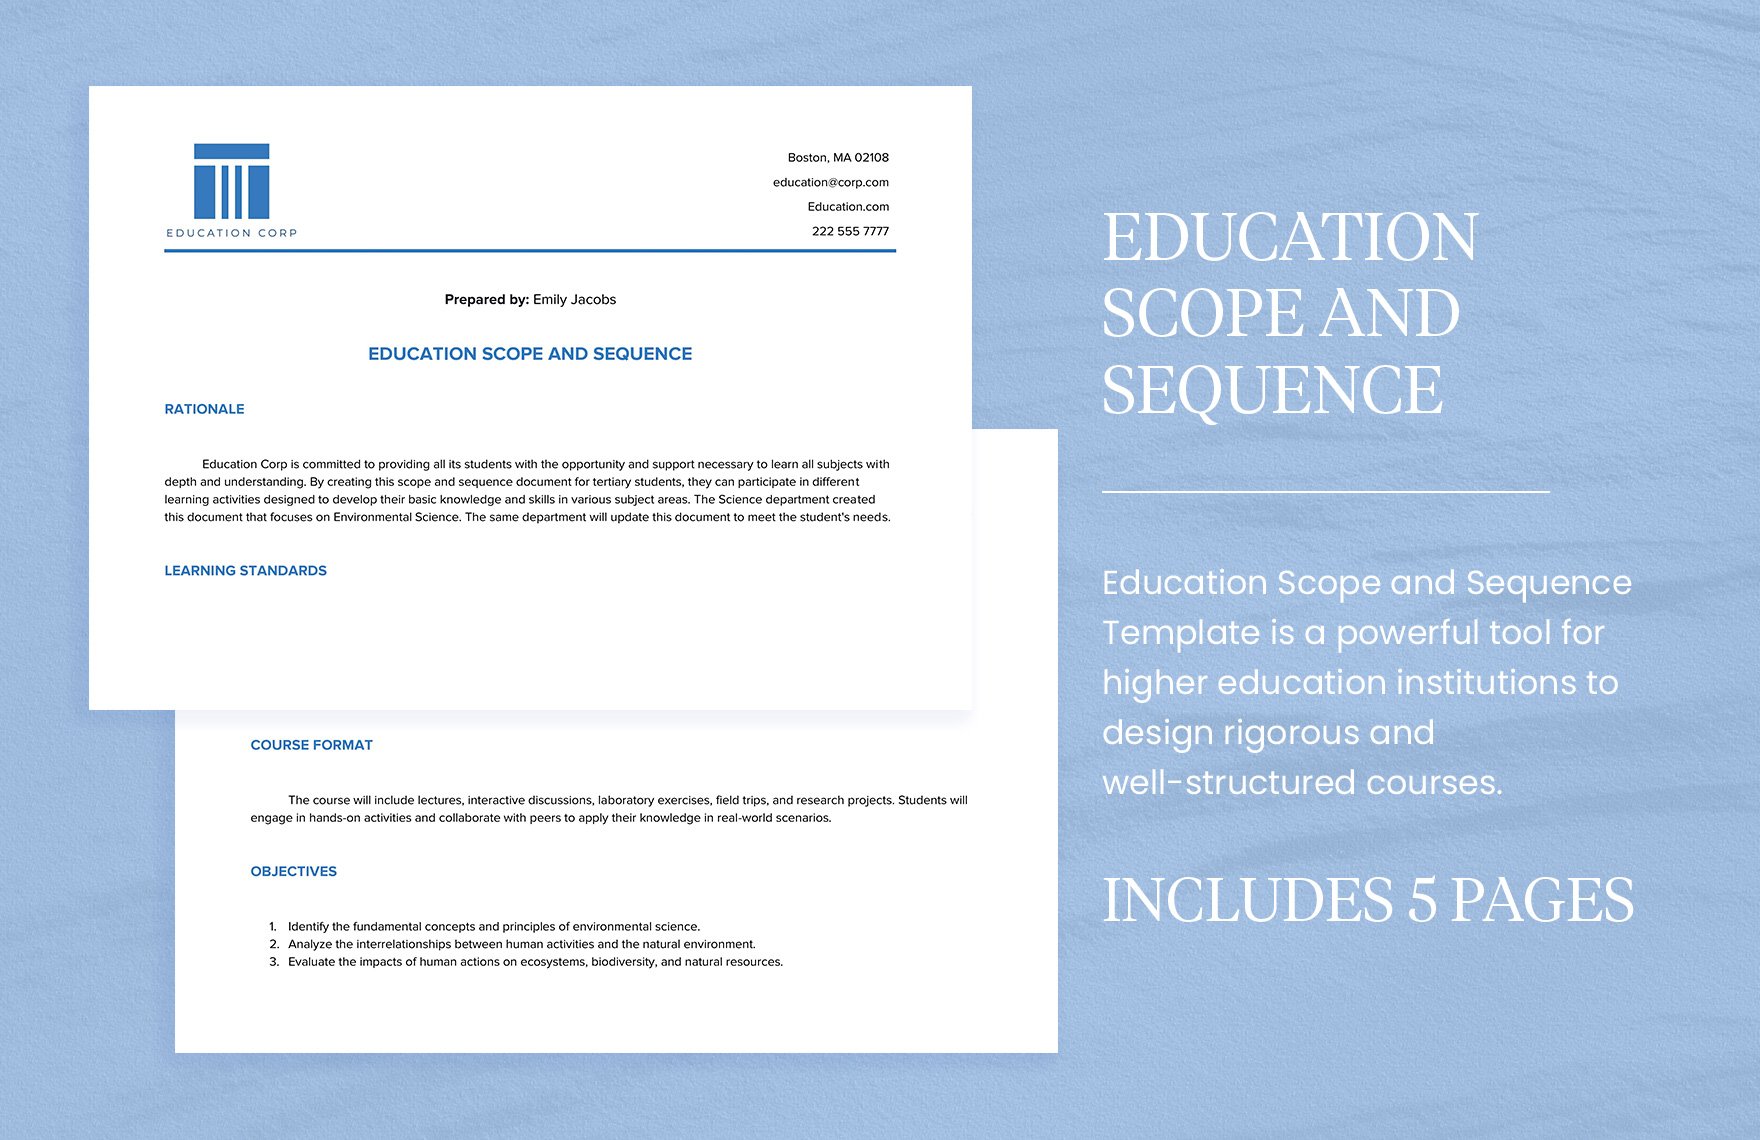 Education Scope and Sequence